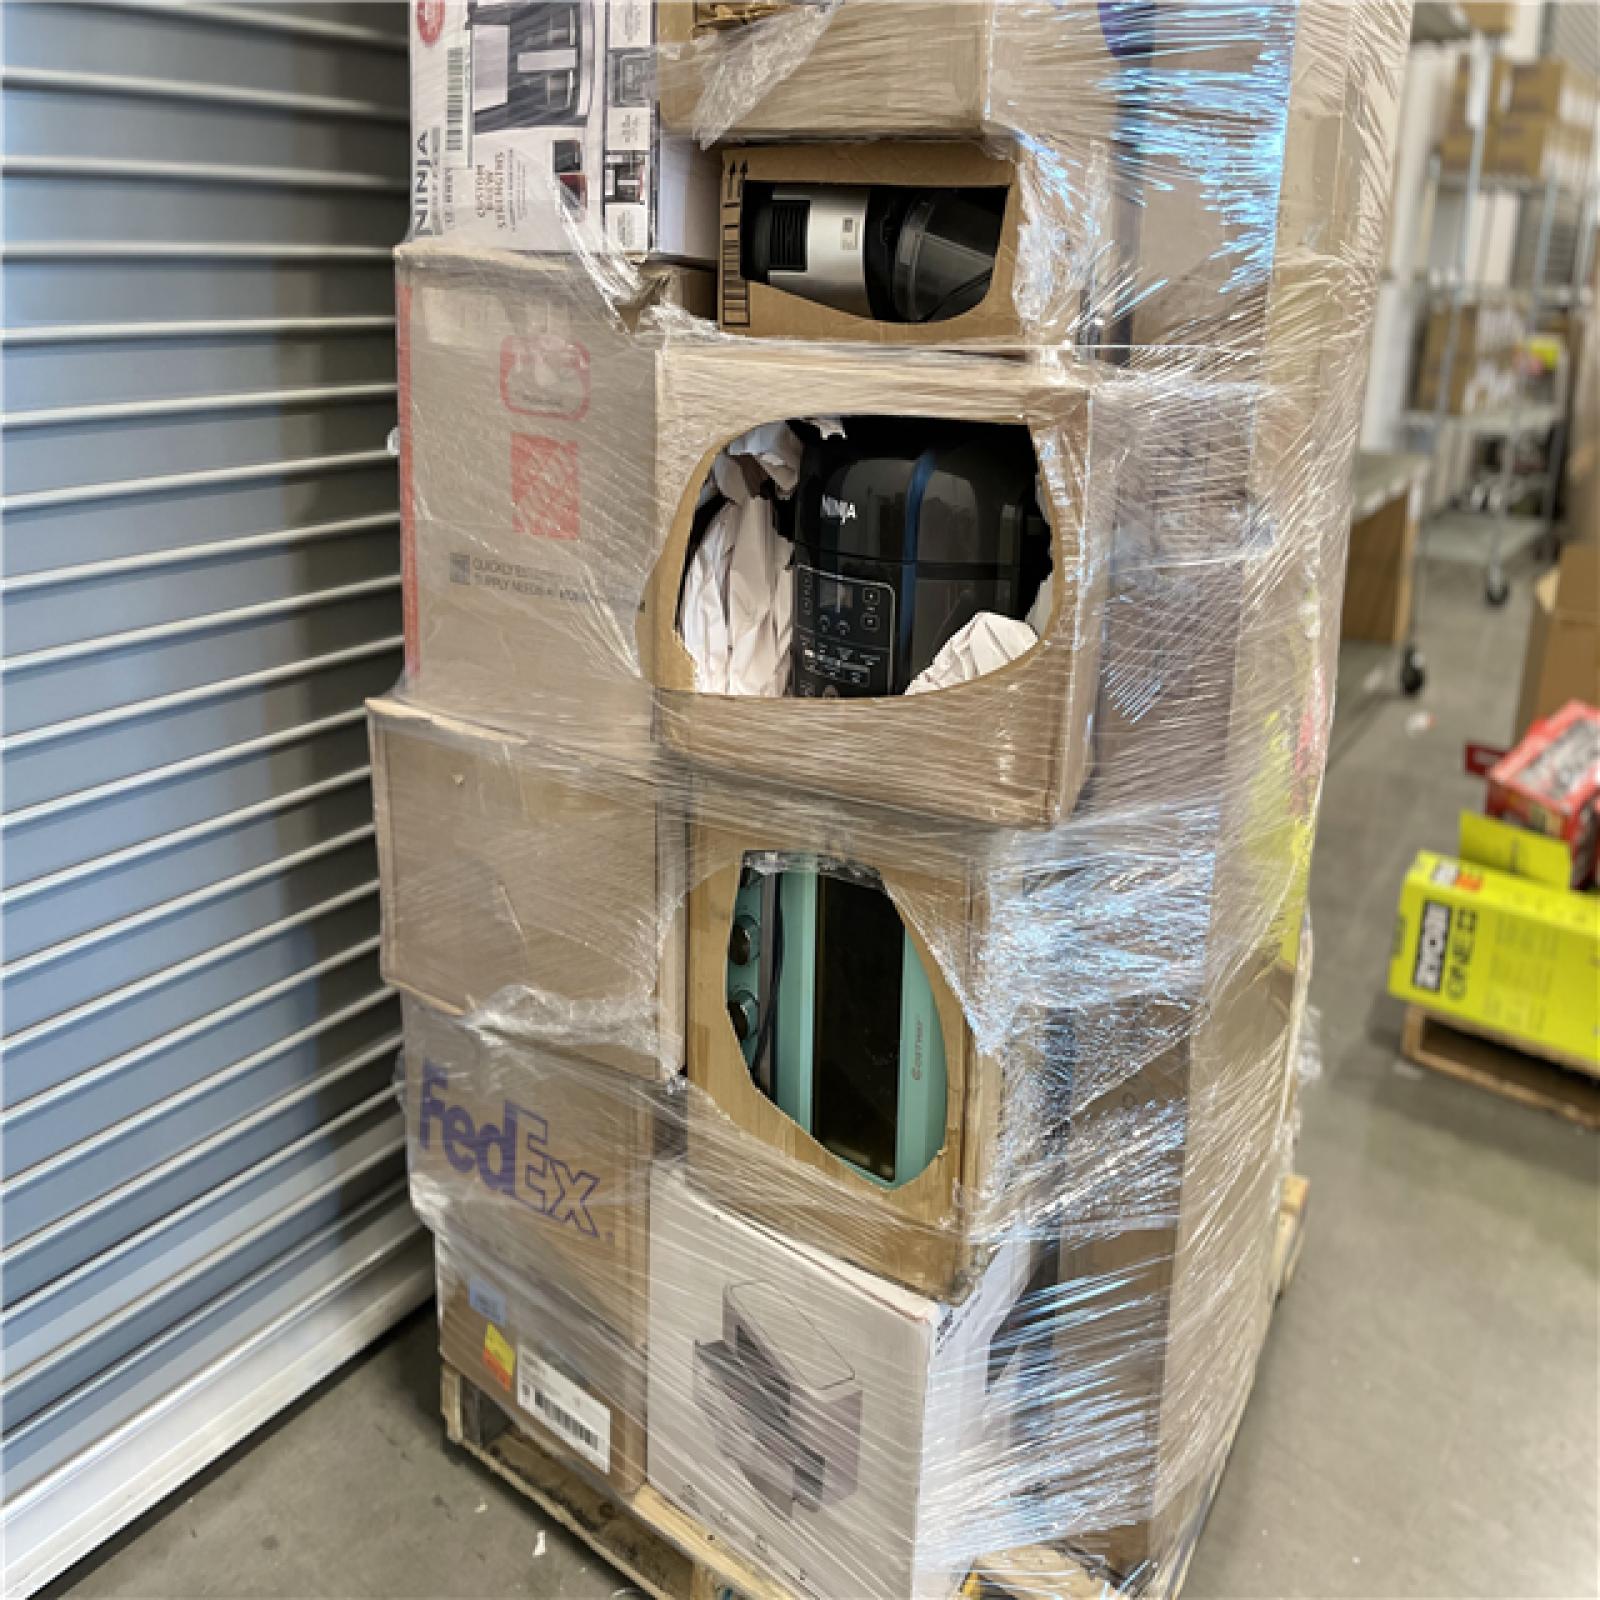 DALLAS LOCATION - AS-IS APPLIANCE PALLET